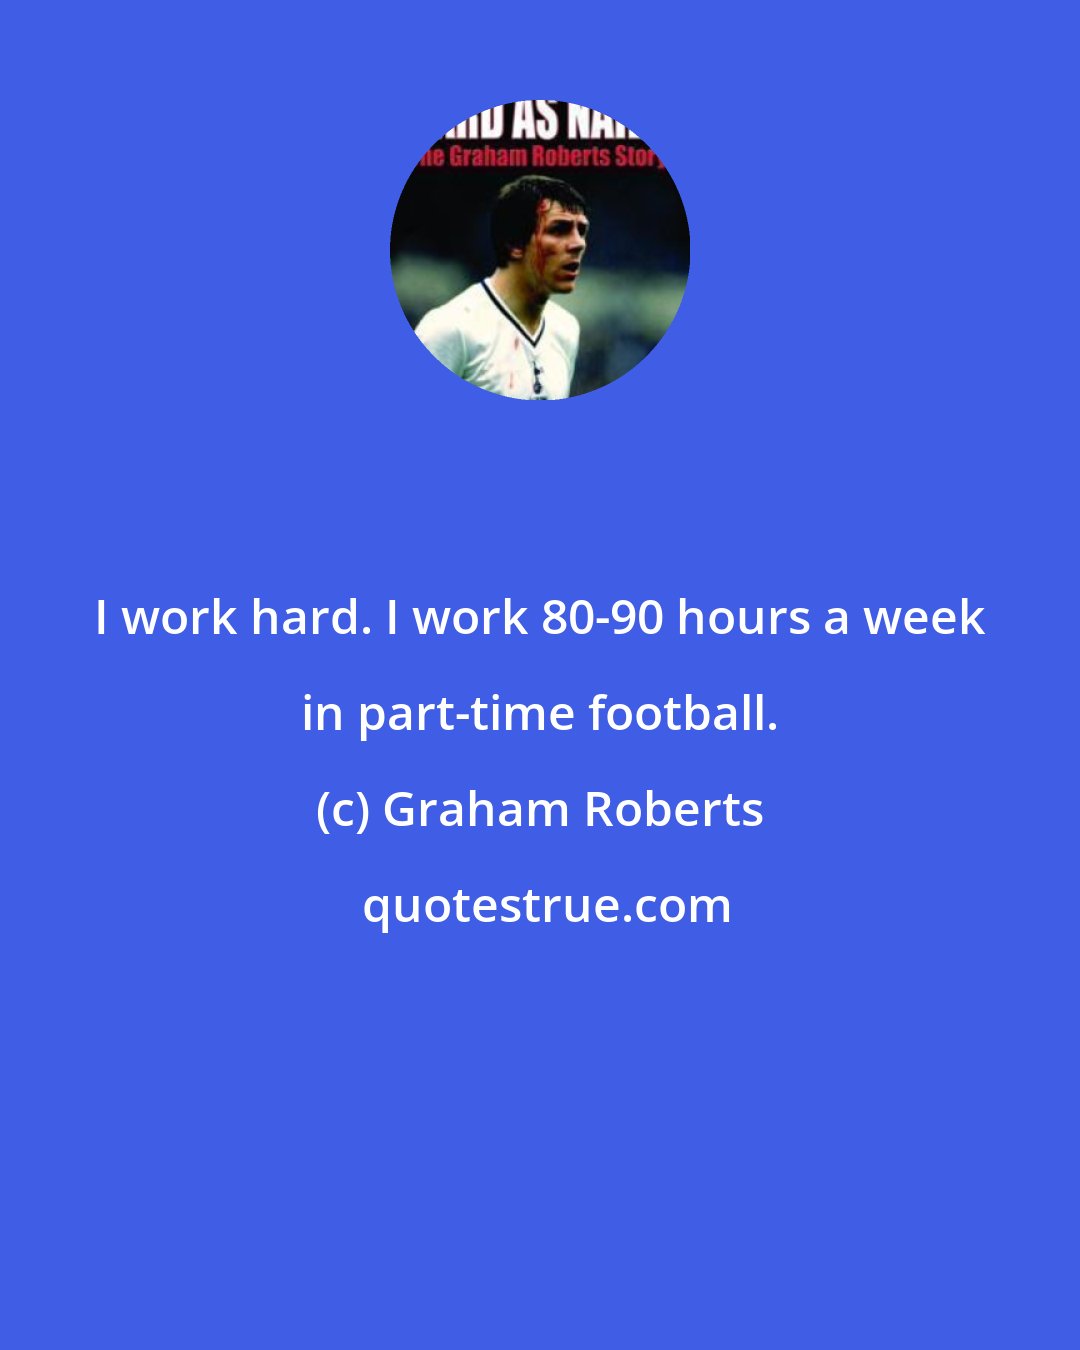 Graham Roberts: I work hard. I work 80-90 hours a week in part-time football.